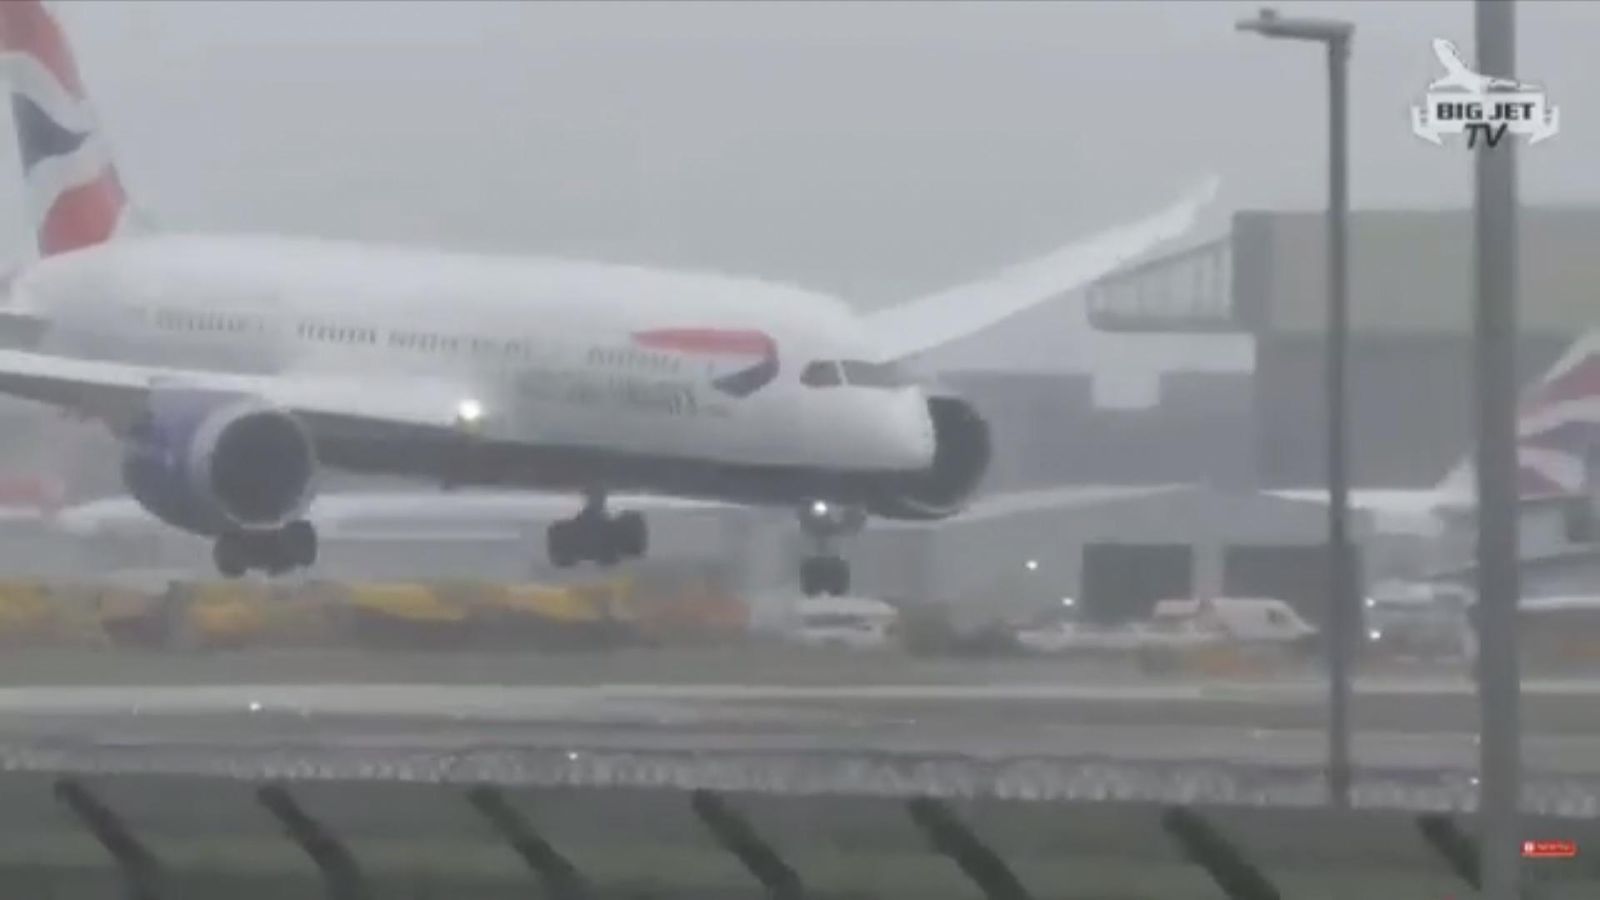 Plane struggles to land in strong winds | UK News | Sky News